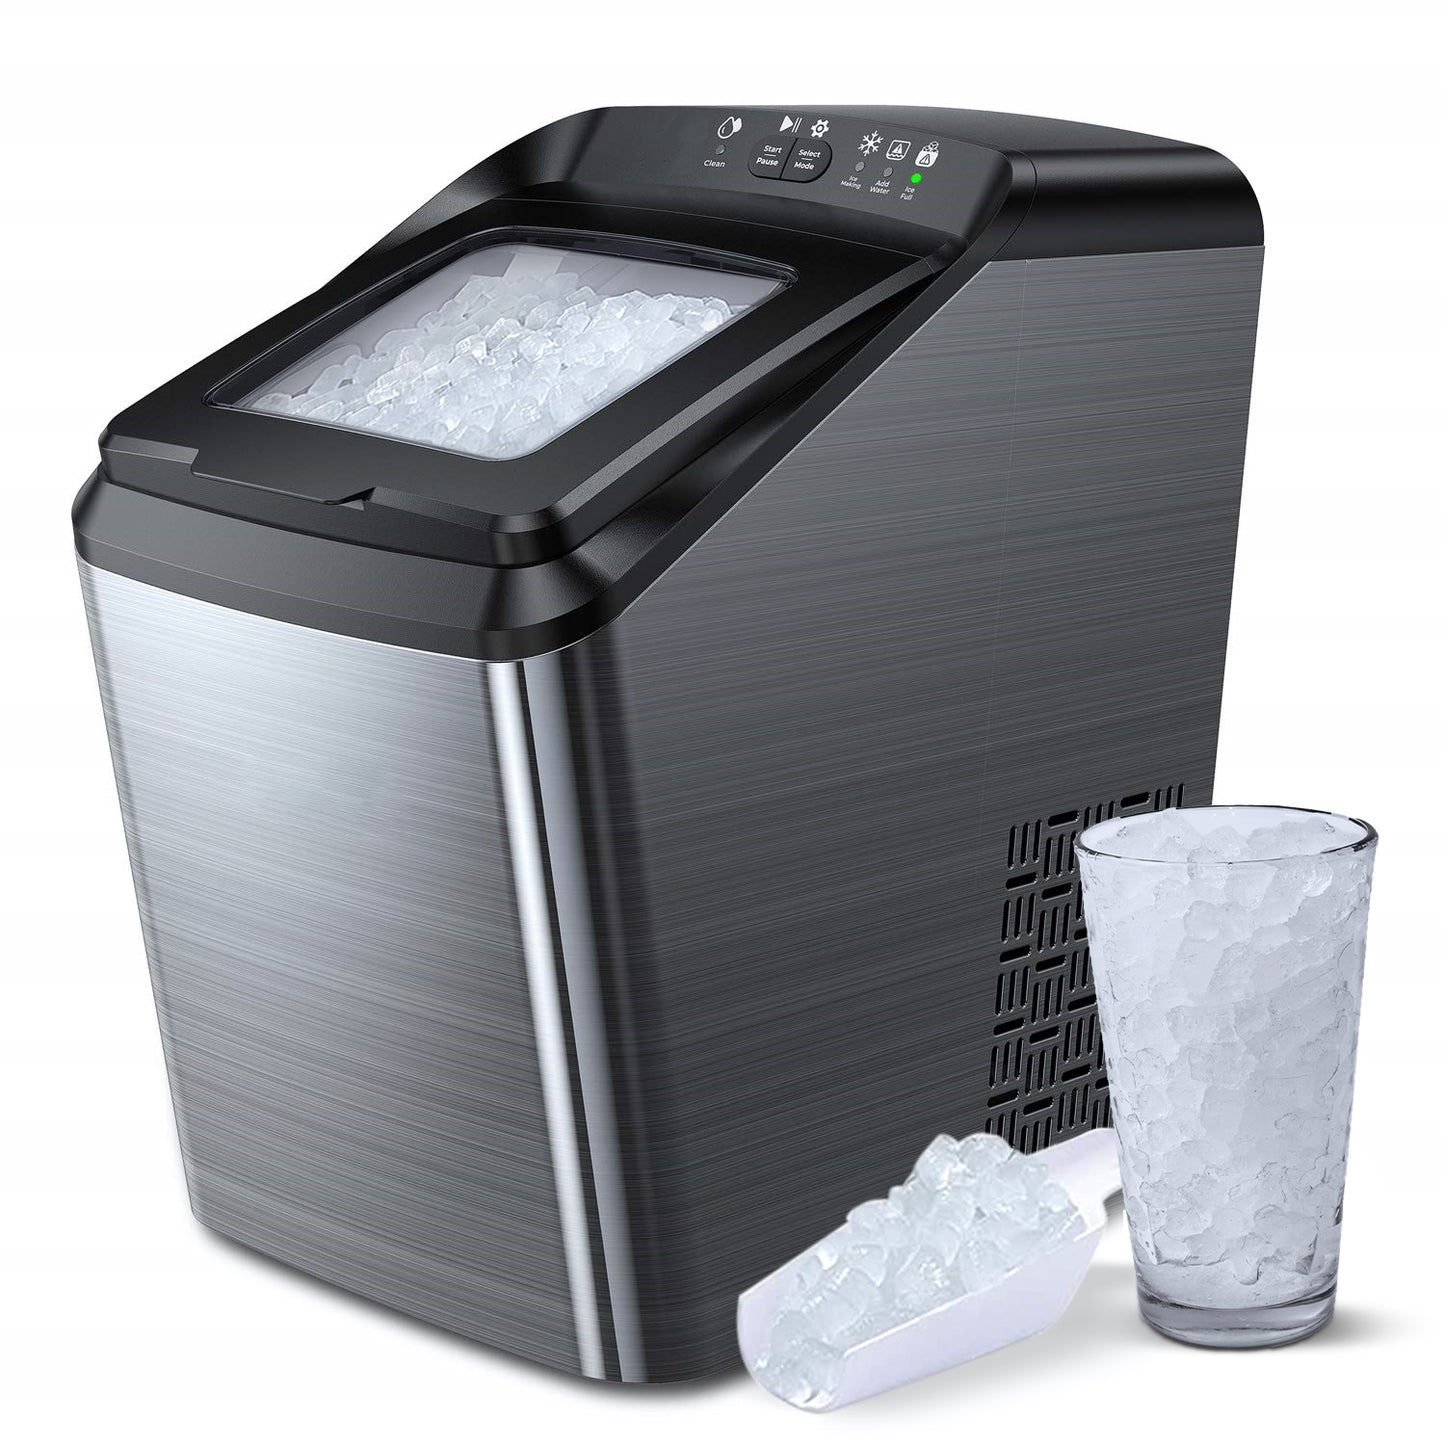 AICOOK 2.7L Nugget Ice Maker Countertop, 26lb Crunchy Pellet Ice per Day, Sonic ice Maker with 3.3lb Ice Bin and Scoop for Home Office, Self-Cleaning